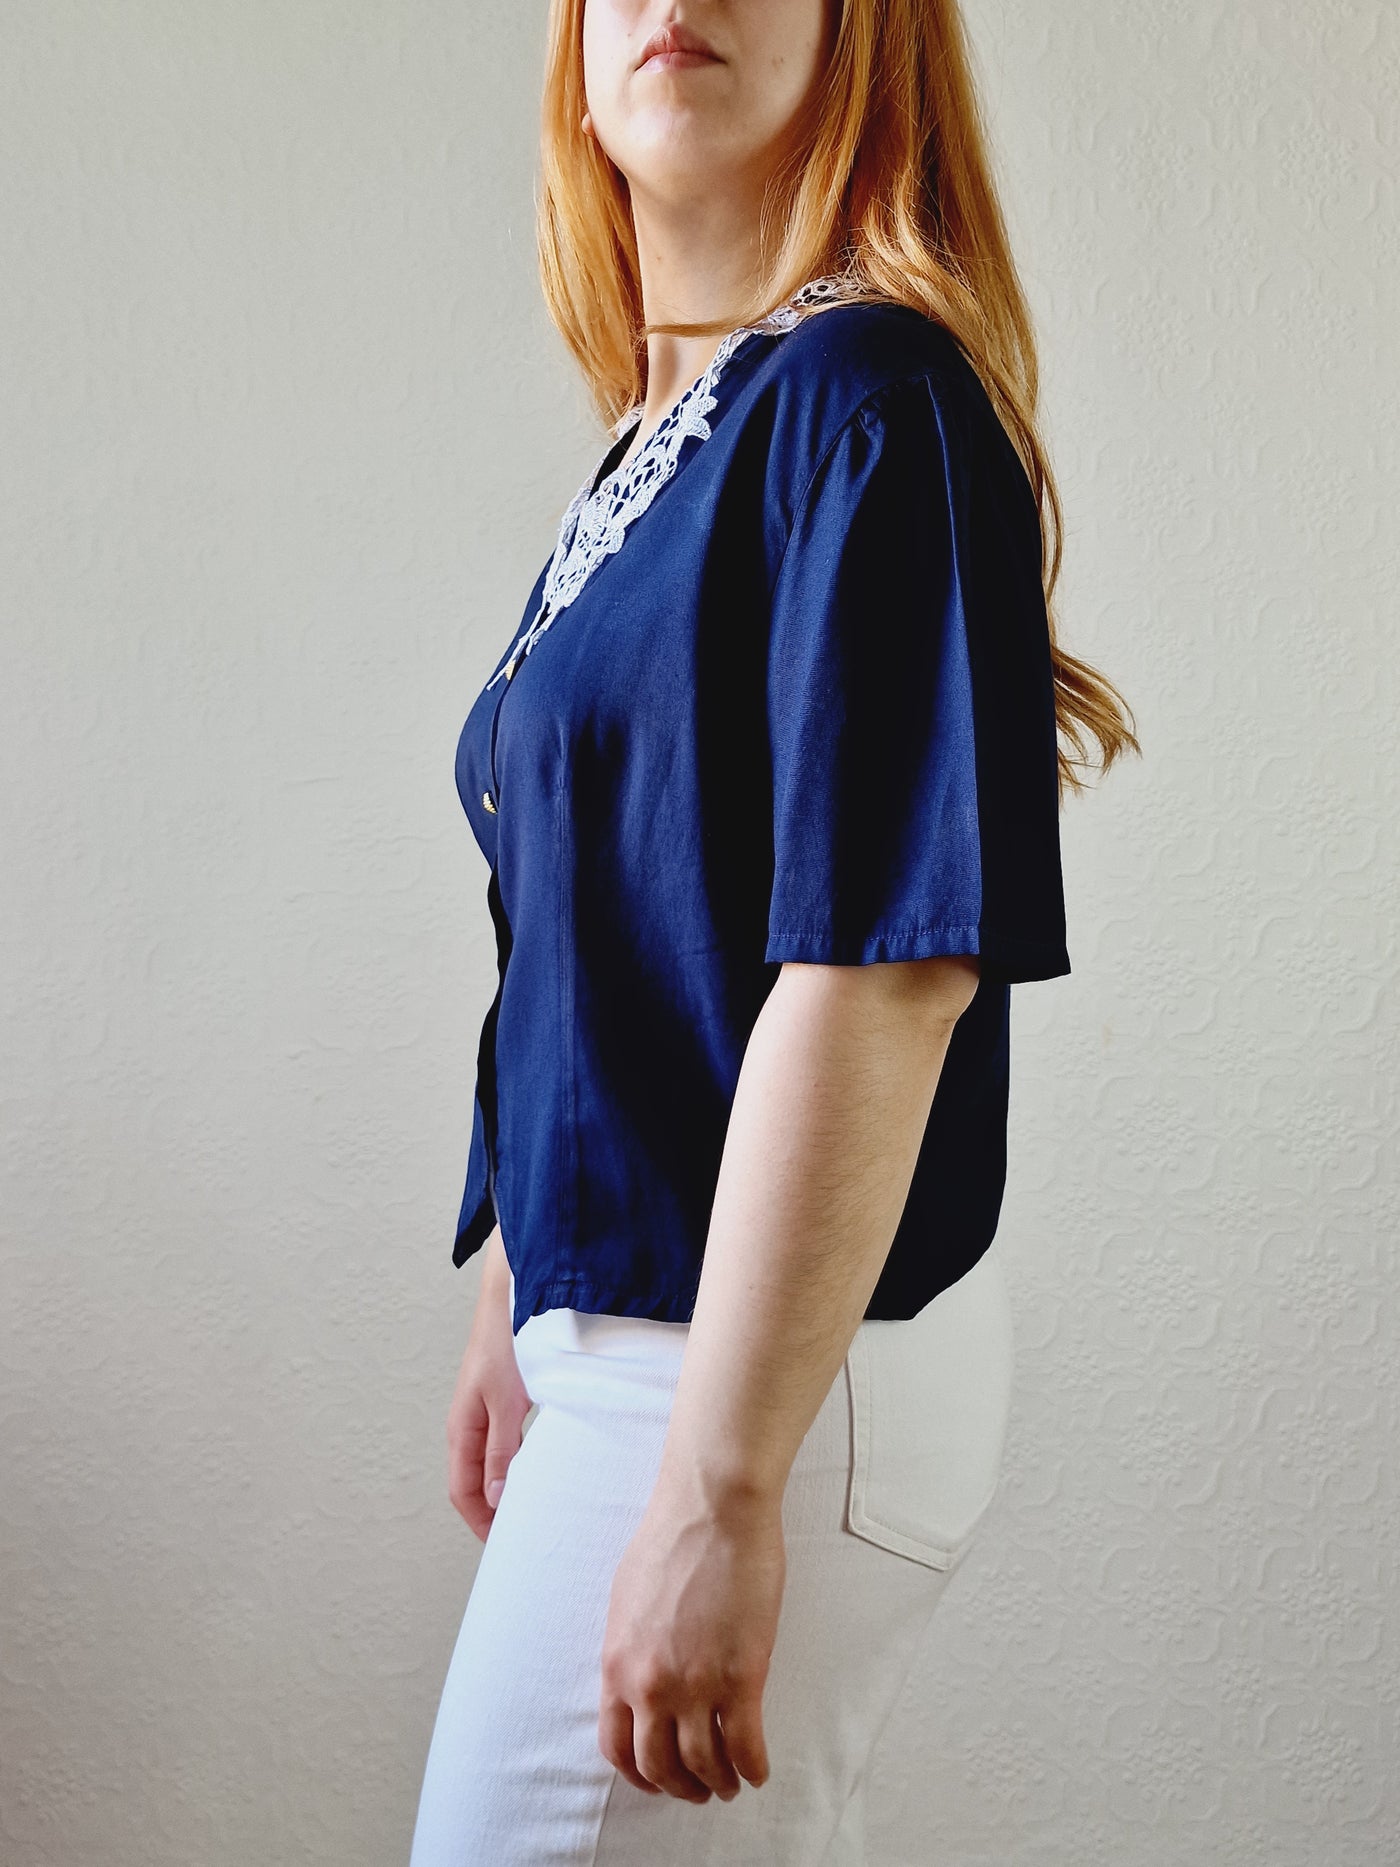 Vintage 80s Navy Blue Short Sleeve Blouse with Lace Collar - S/M